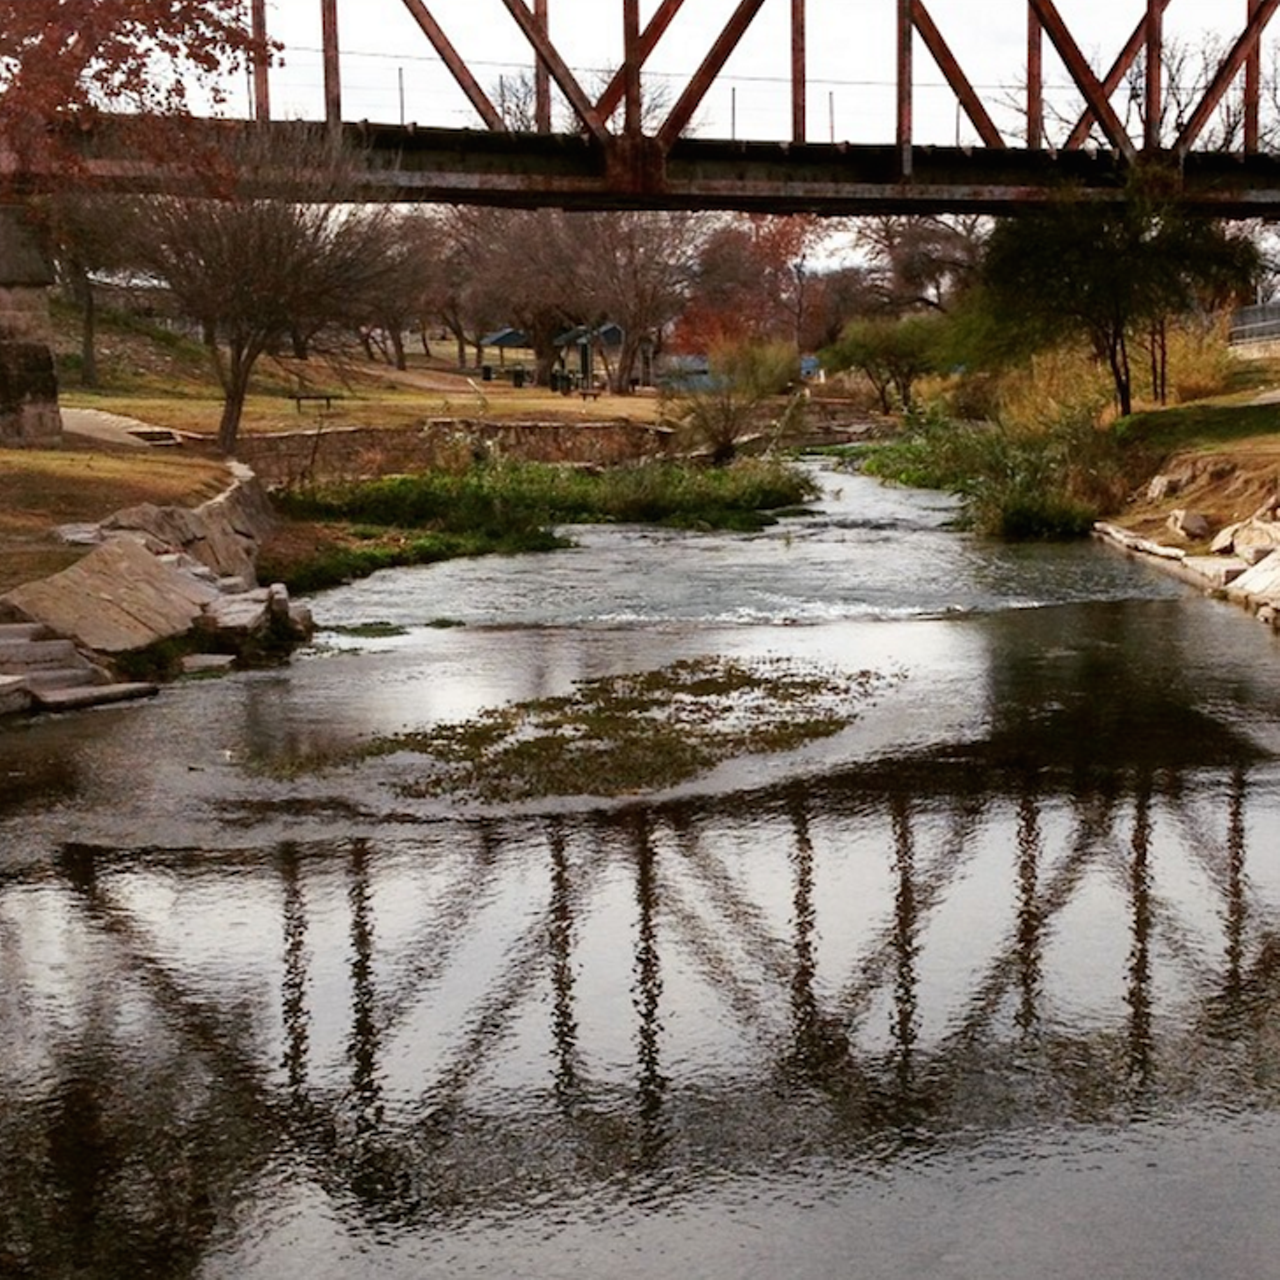 San Felipe Springs in Del Rio, Texas  
Val Verde County, edwardsacquifer.net 
The San Felipe Springs are a group of springs that extends two miles along San Felipe Creek northeast of Del Rio in Val Verde County. 
Photo via Instagram (catbellaire)